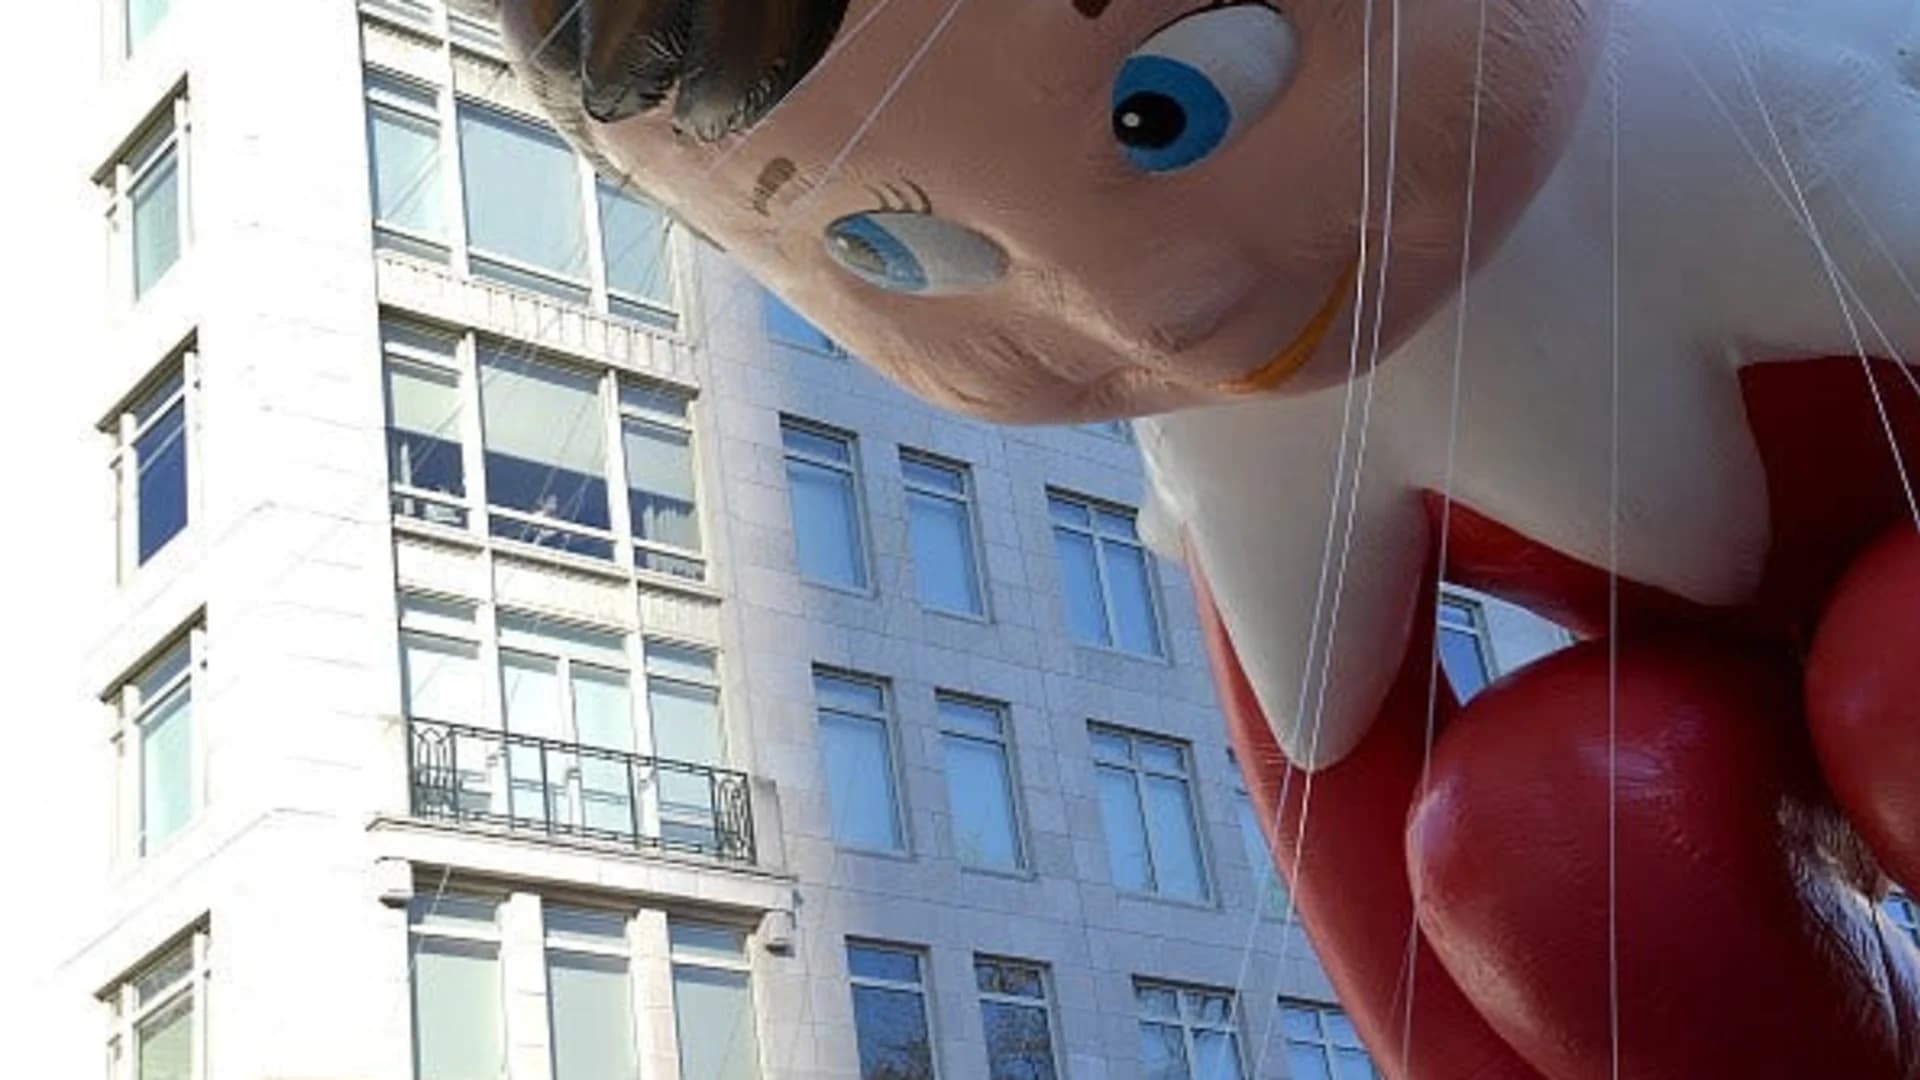 Photos from the Macy's Thanksgiving Day Parade